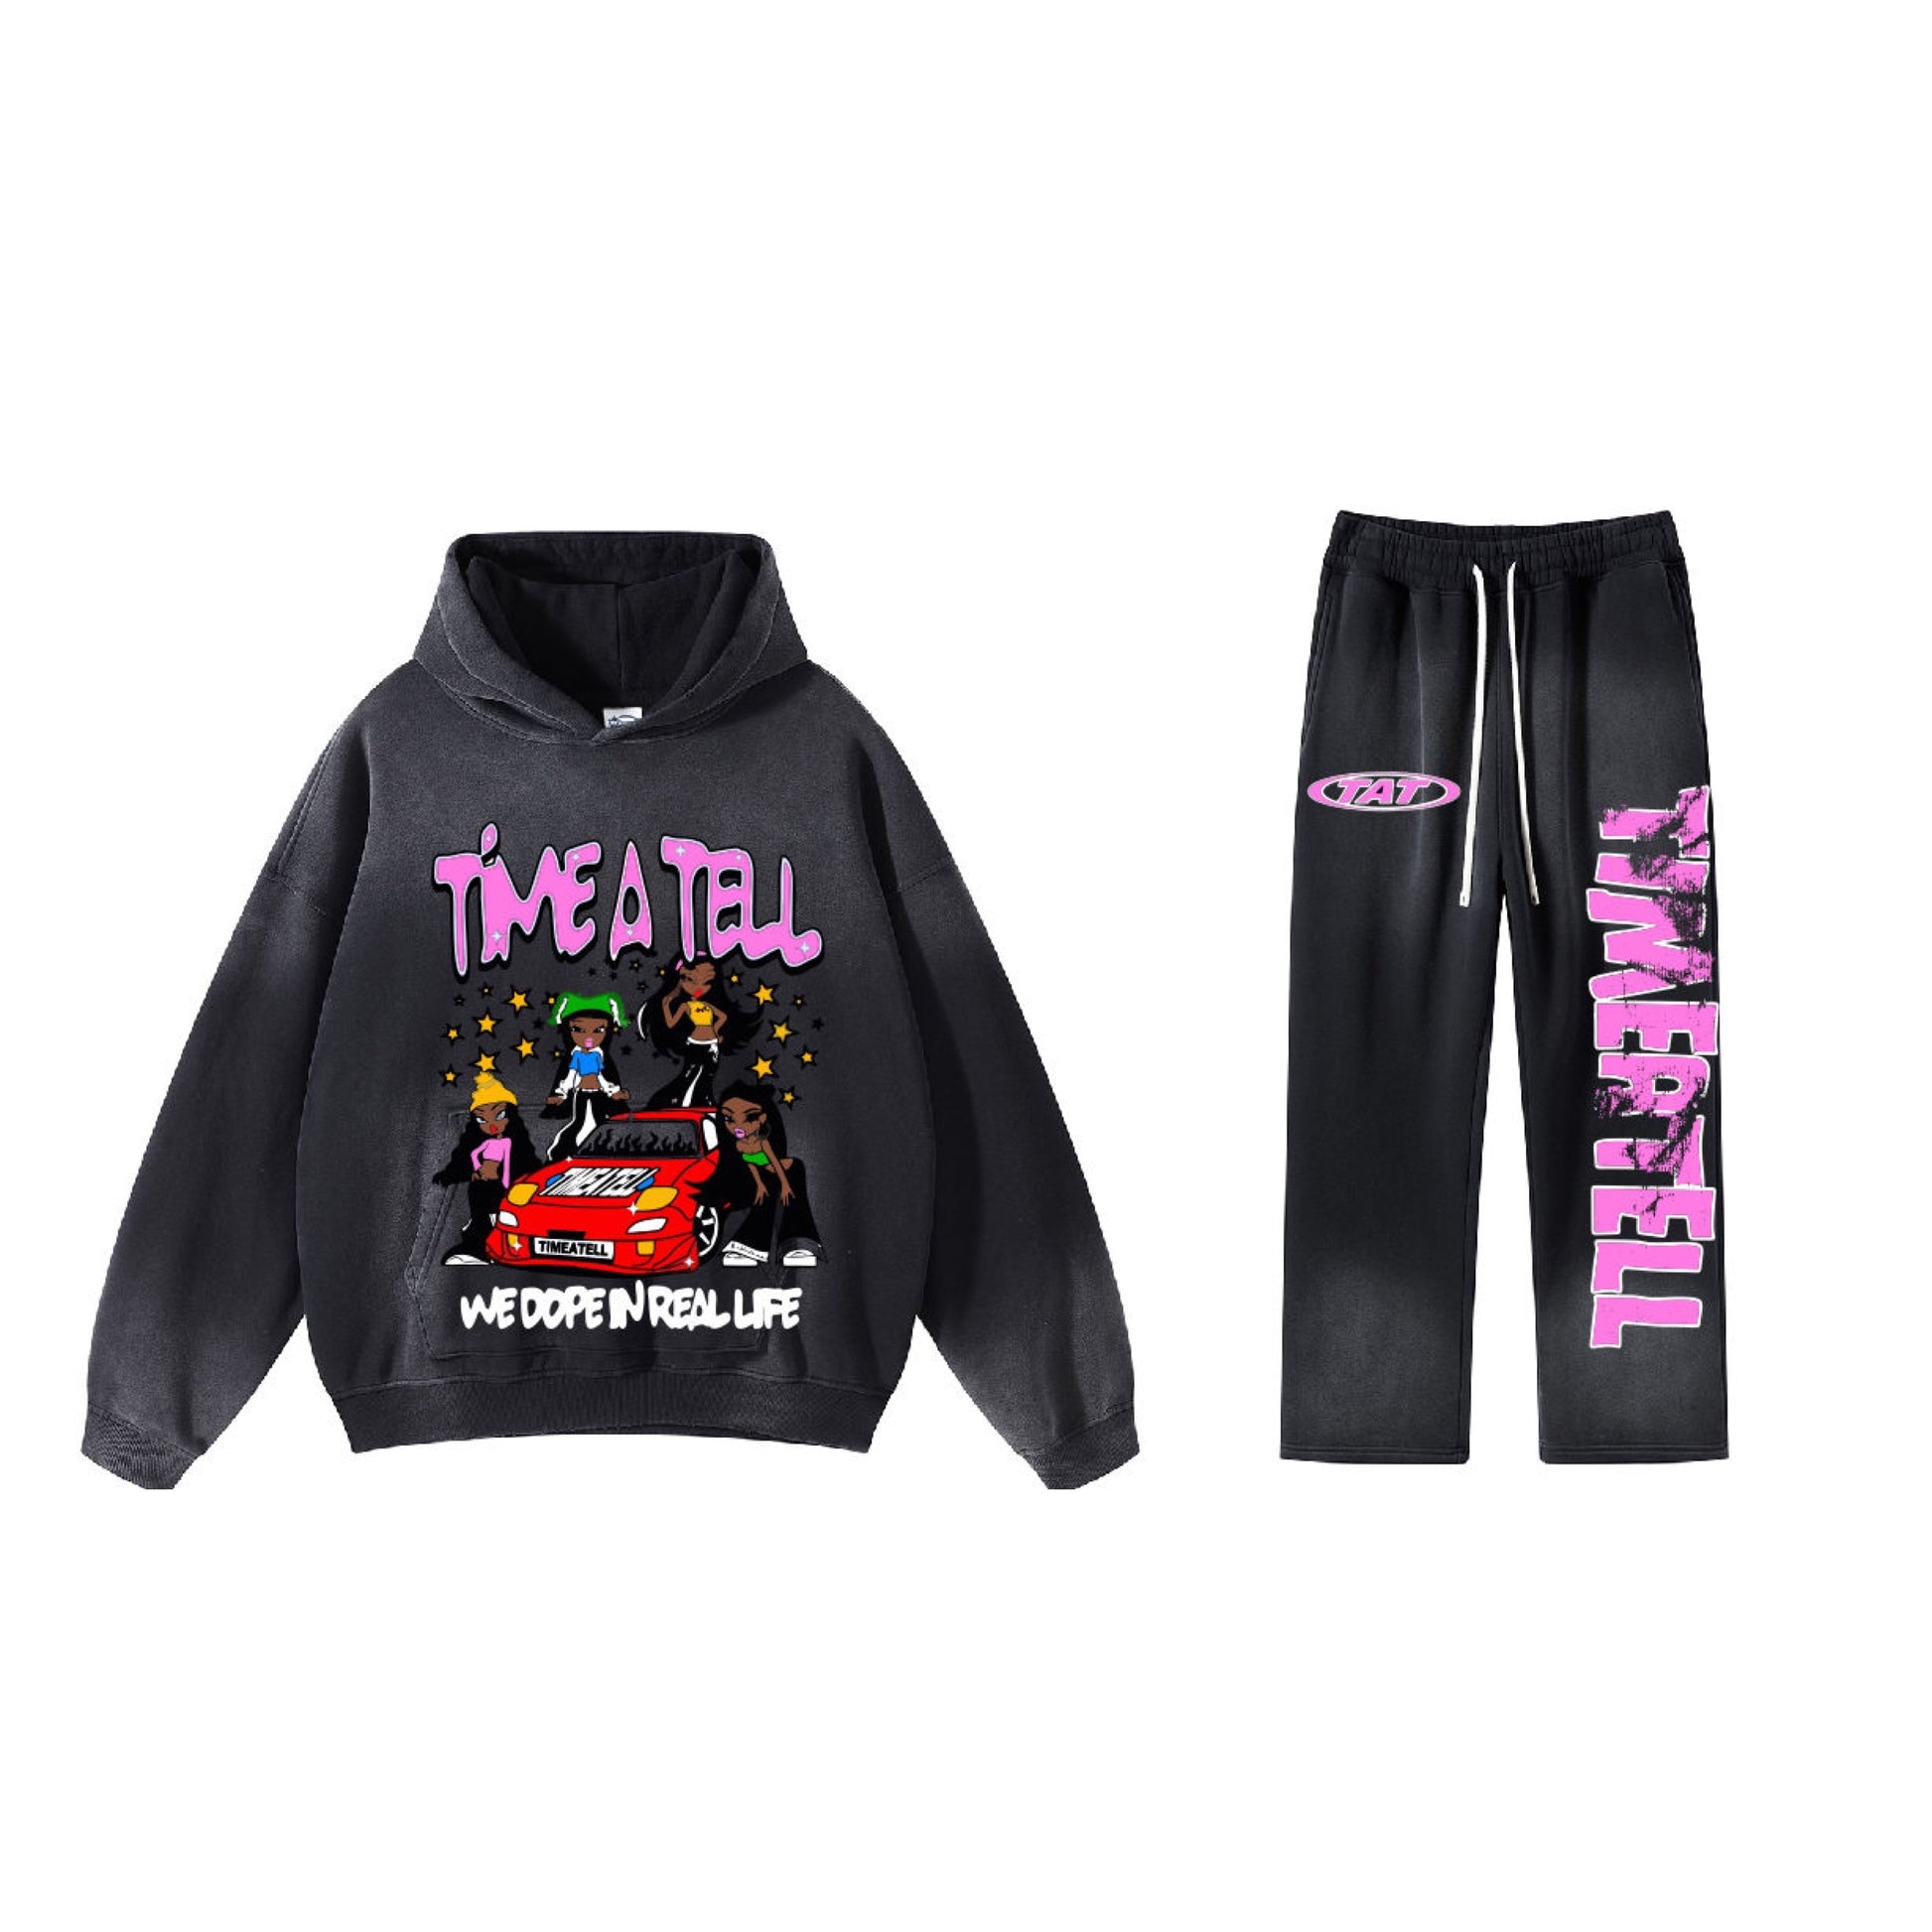 Time A Tell “We dope in real life sweatsuit” shoptimeatell